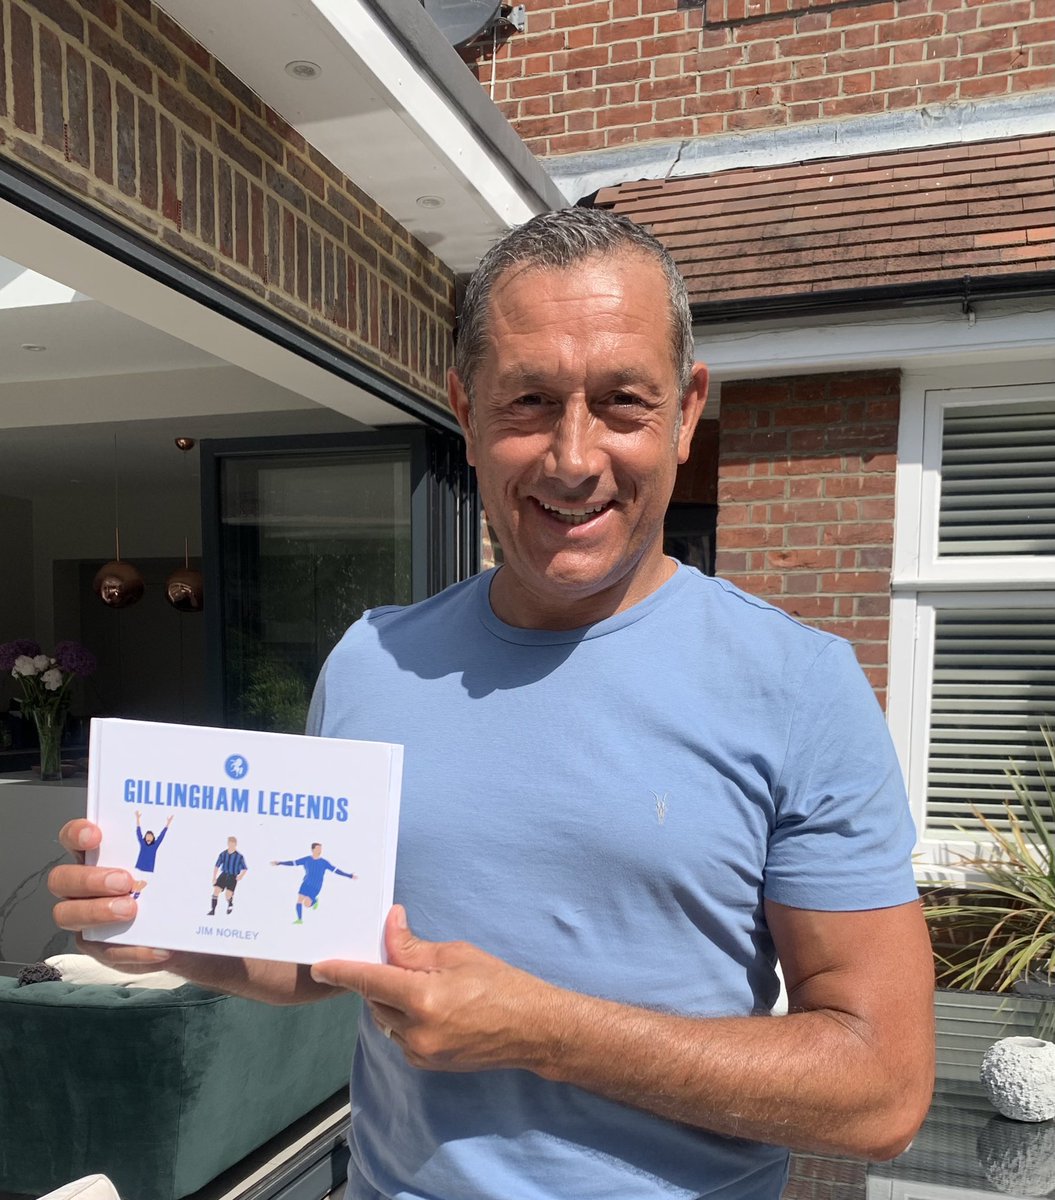 GILLINGHAM LEGENDS - THE BOOK

By popular demand, the original Gillingham Legends book is back with a limited release. 175 Gills legends artworks in one A5 hardback book. Grab a copy while you can!

£17 from gillinghamlegends.com

@neil_smudge
#Gills #GFC #Legends